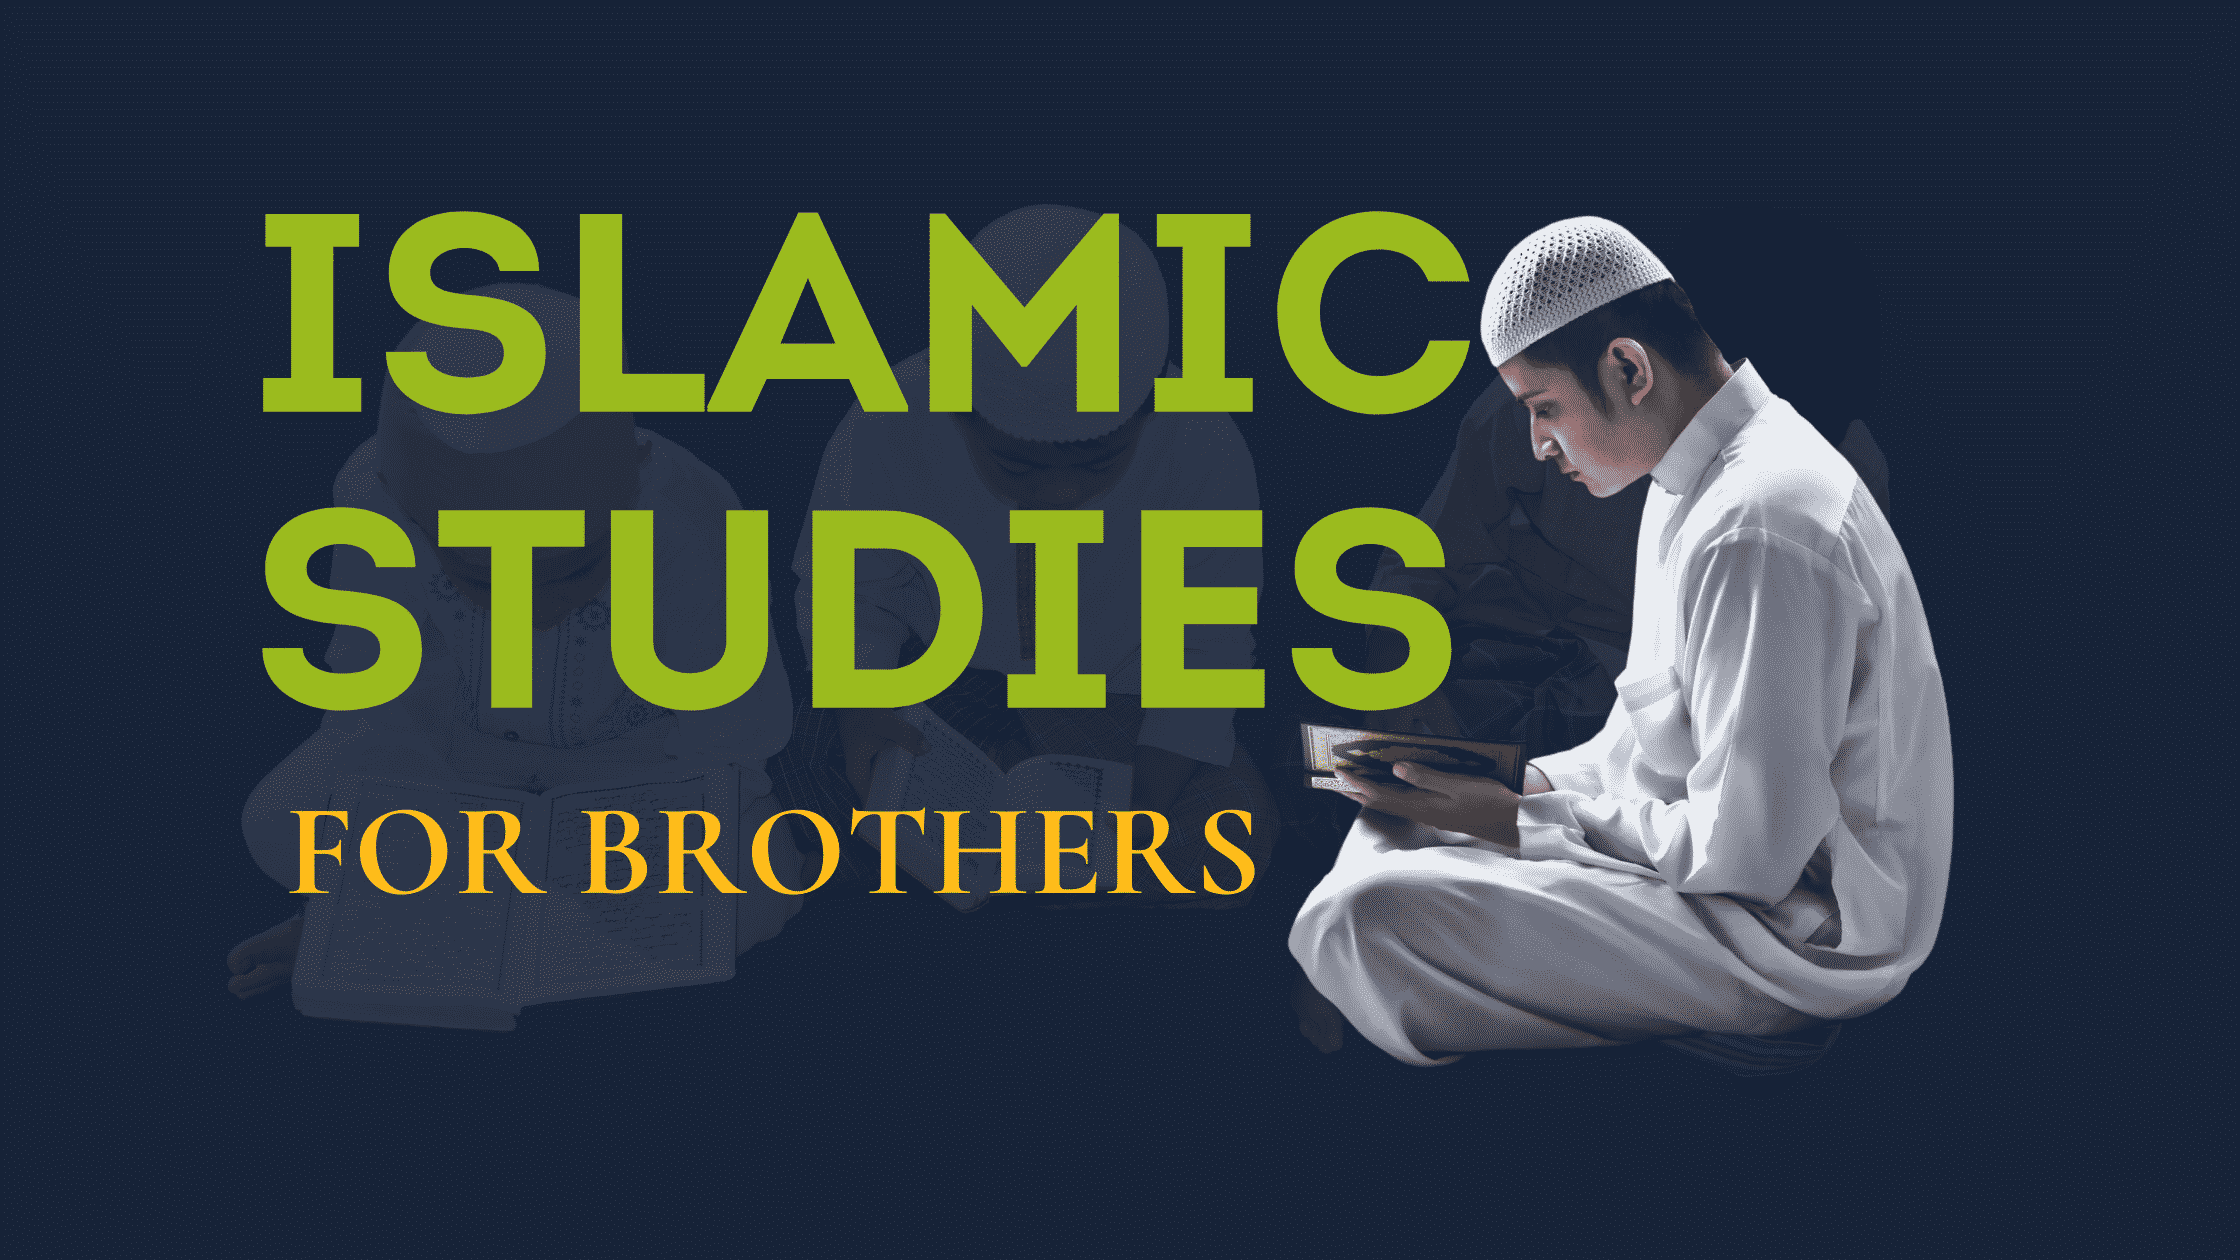 Islamic studies course by expert for brothers and sisters in uk